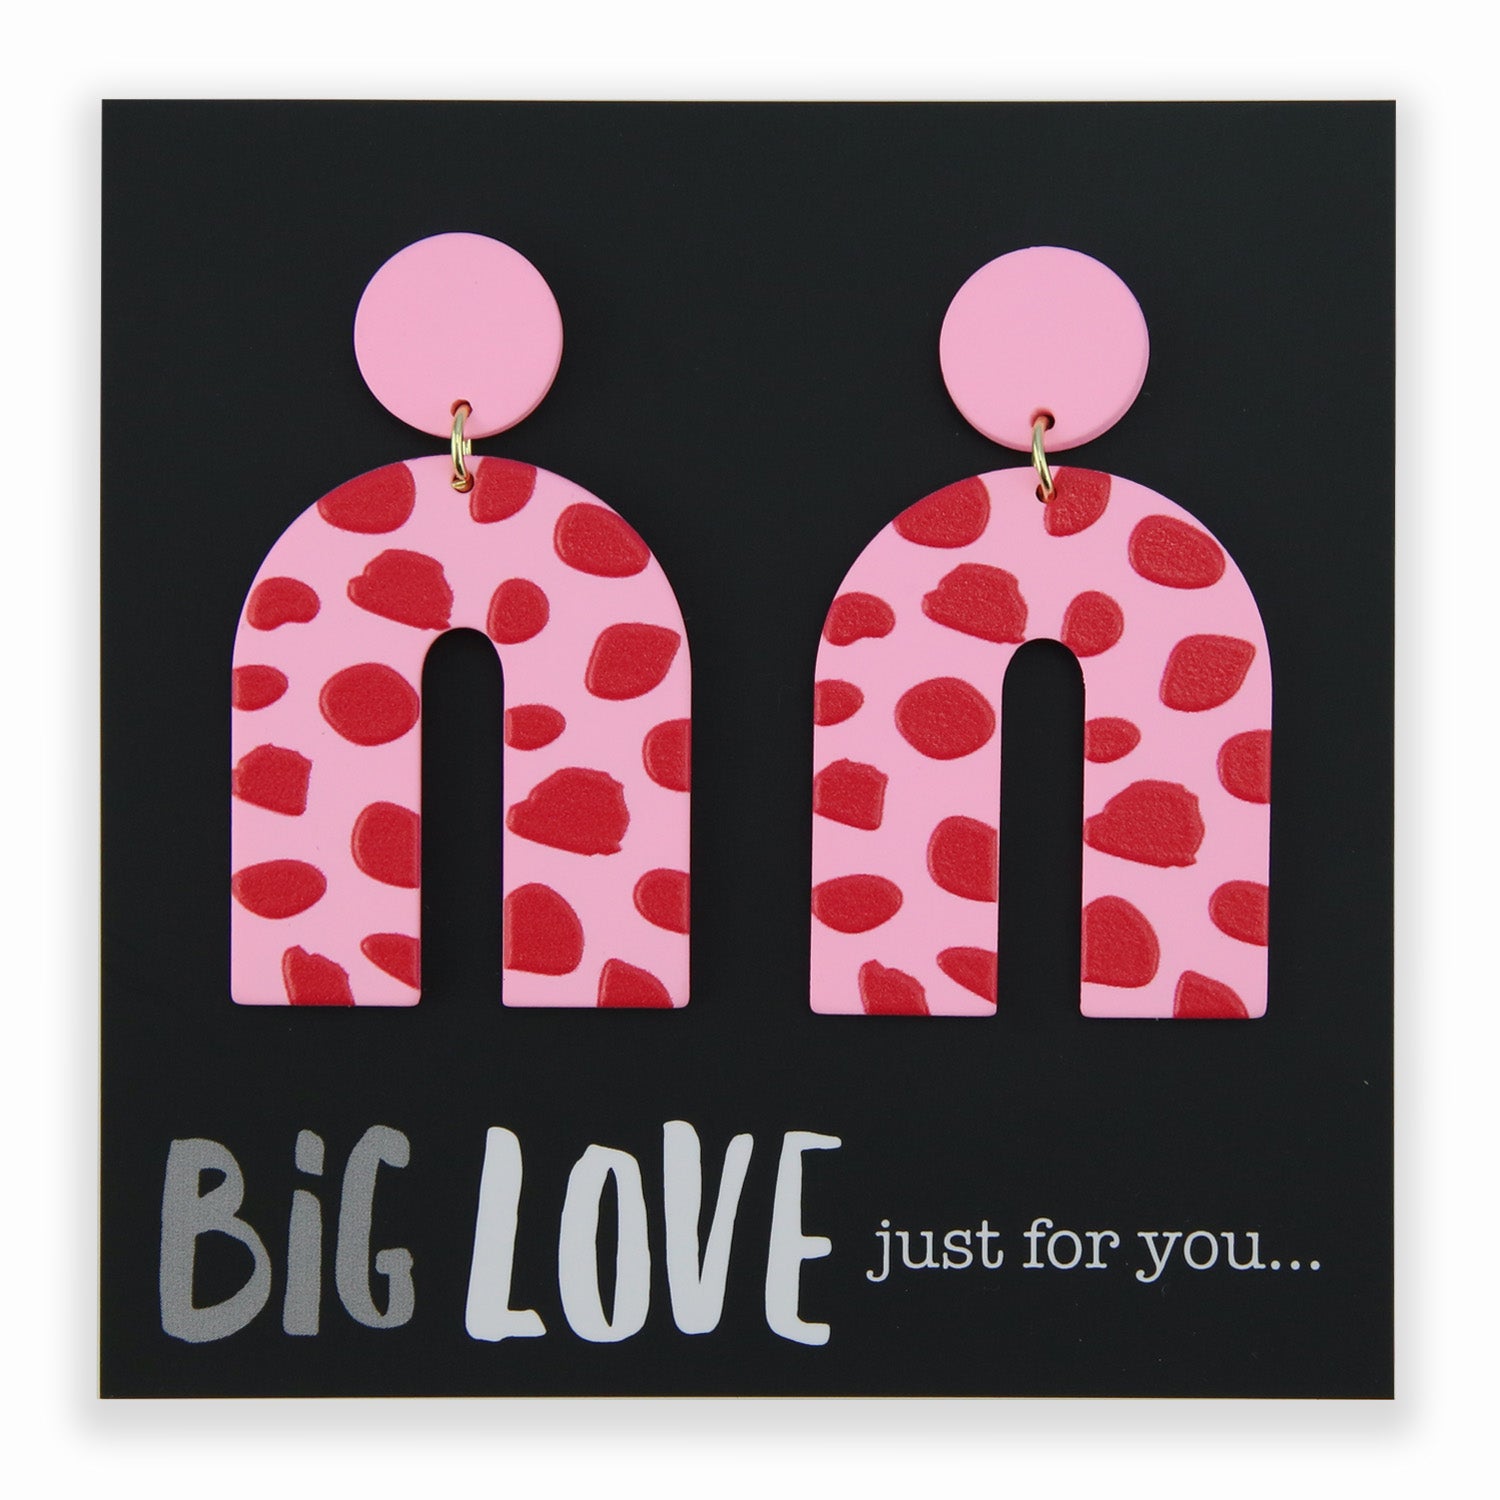 Acrylic Dangles - 'Big Love Just For You' - Sicily (11862)